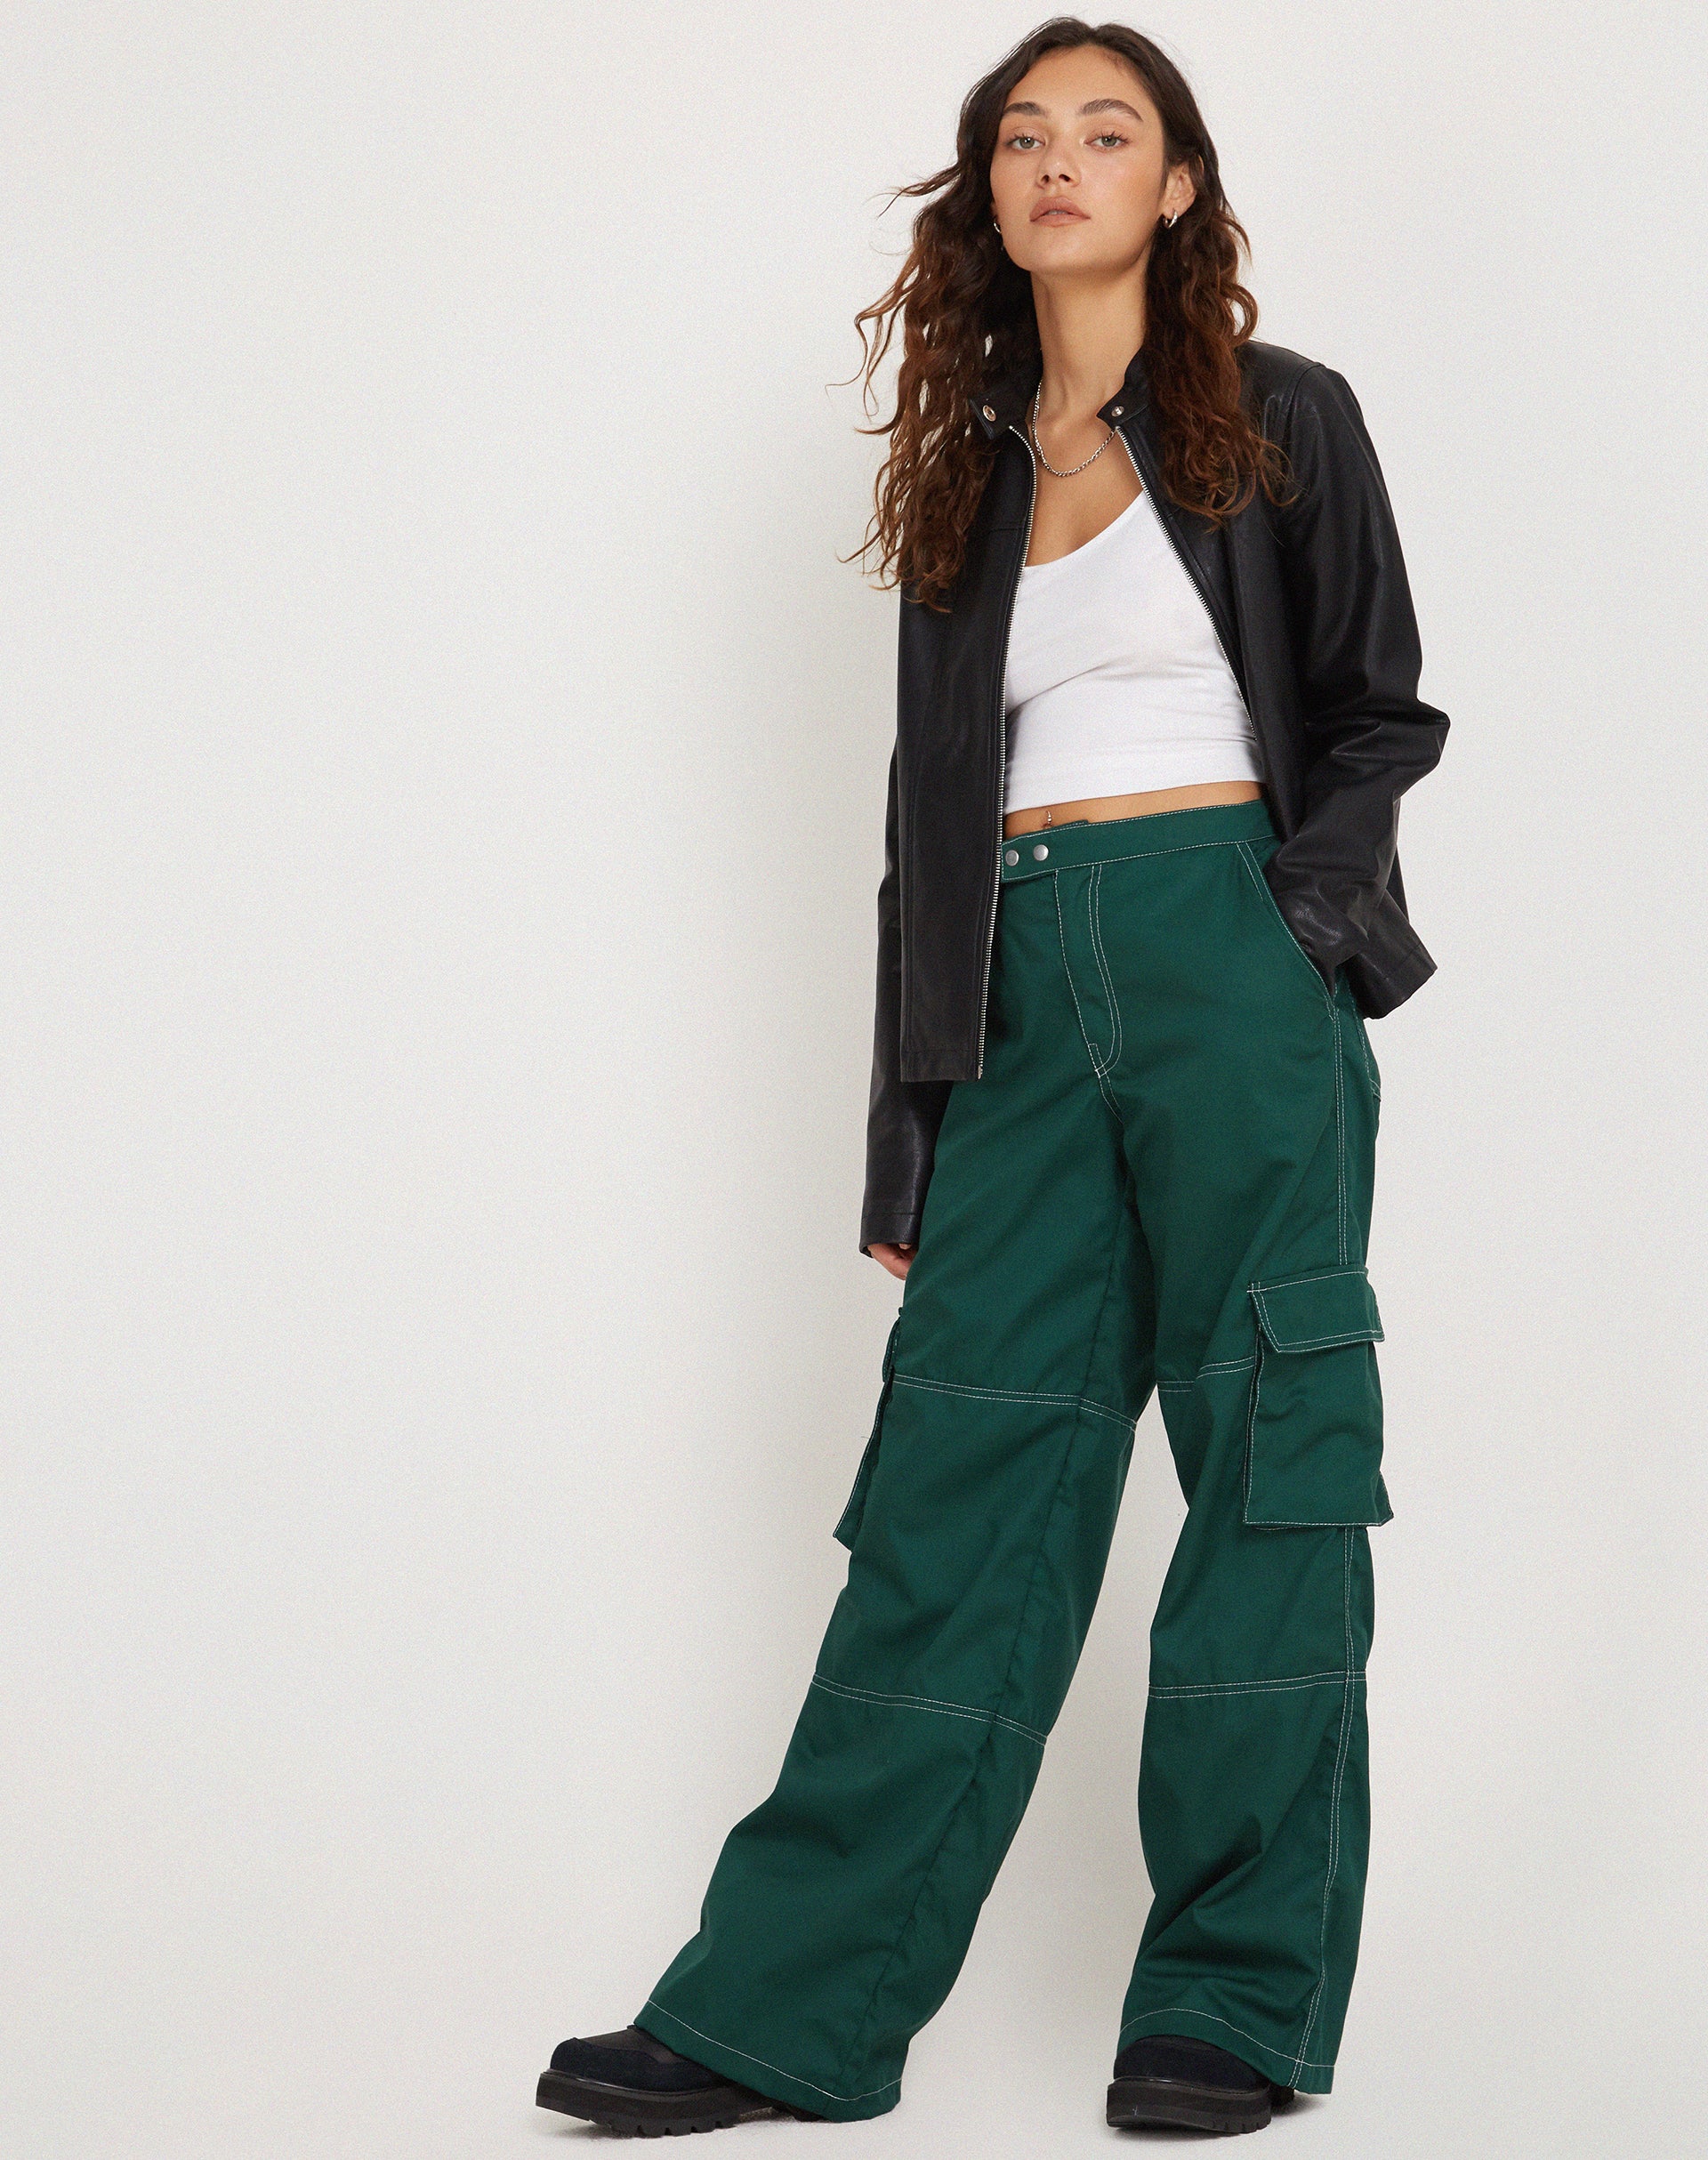 Image of Saul Wide Leg Cargo Trouser in Bottle Green with White Stitching